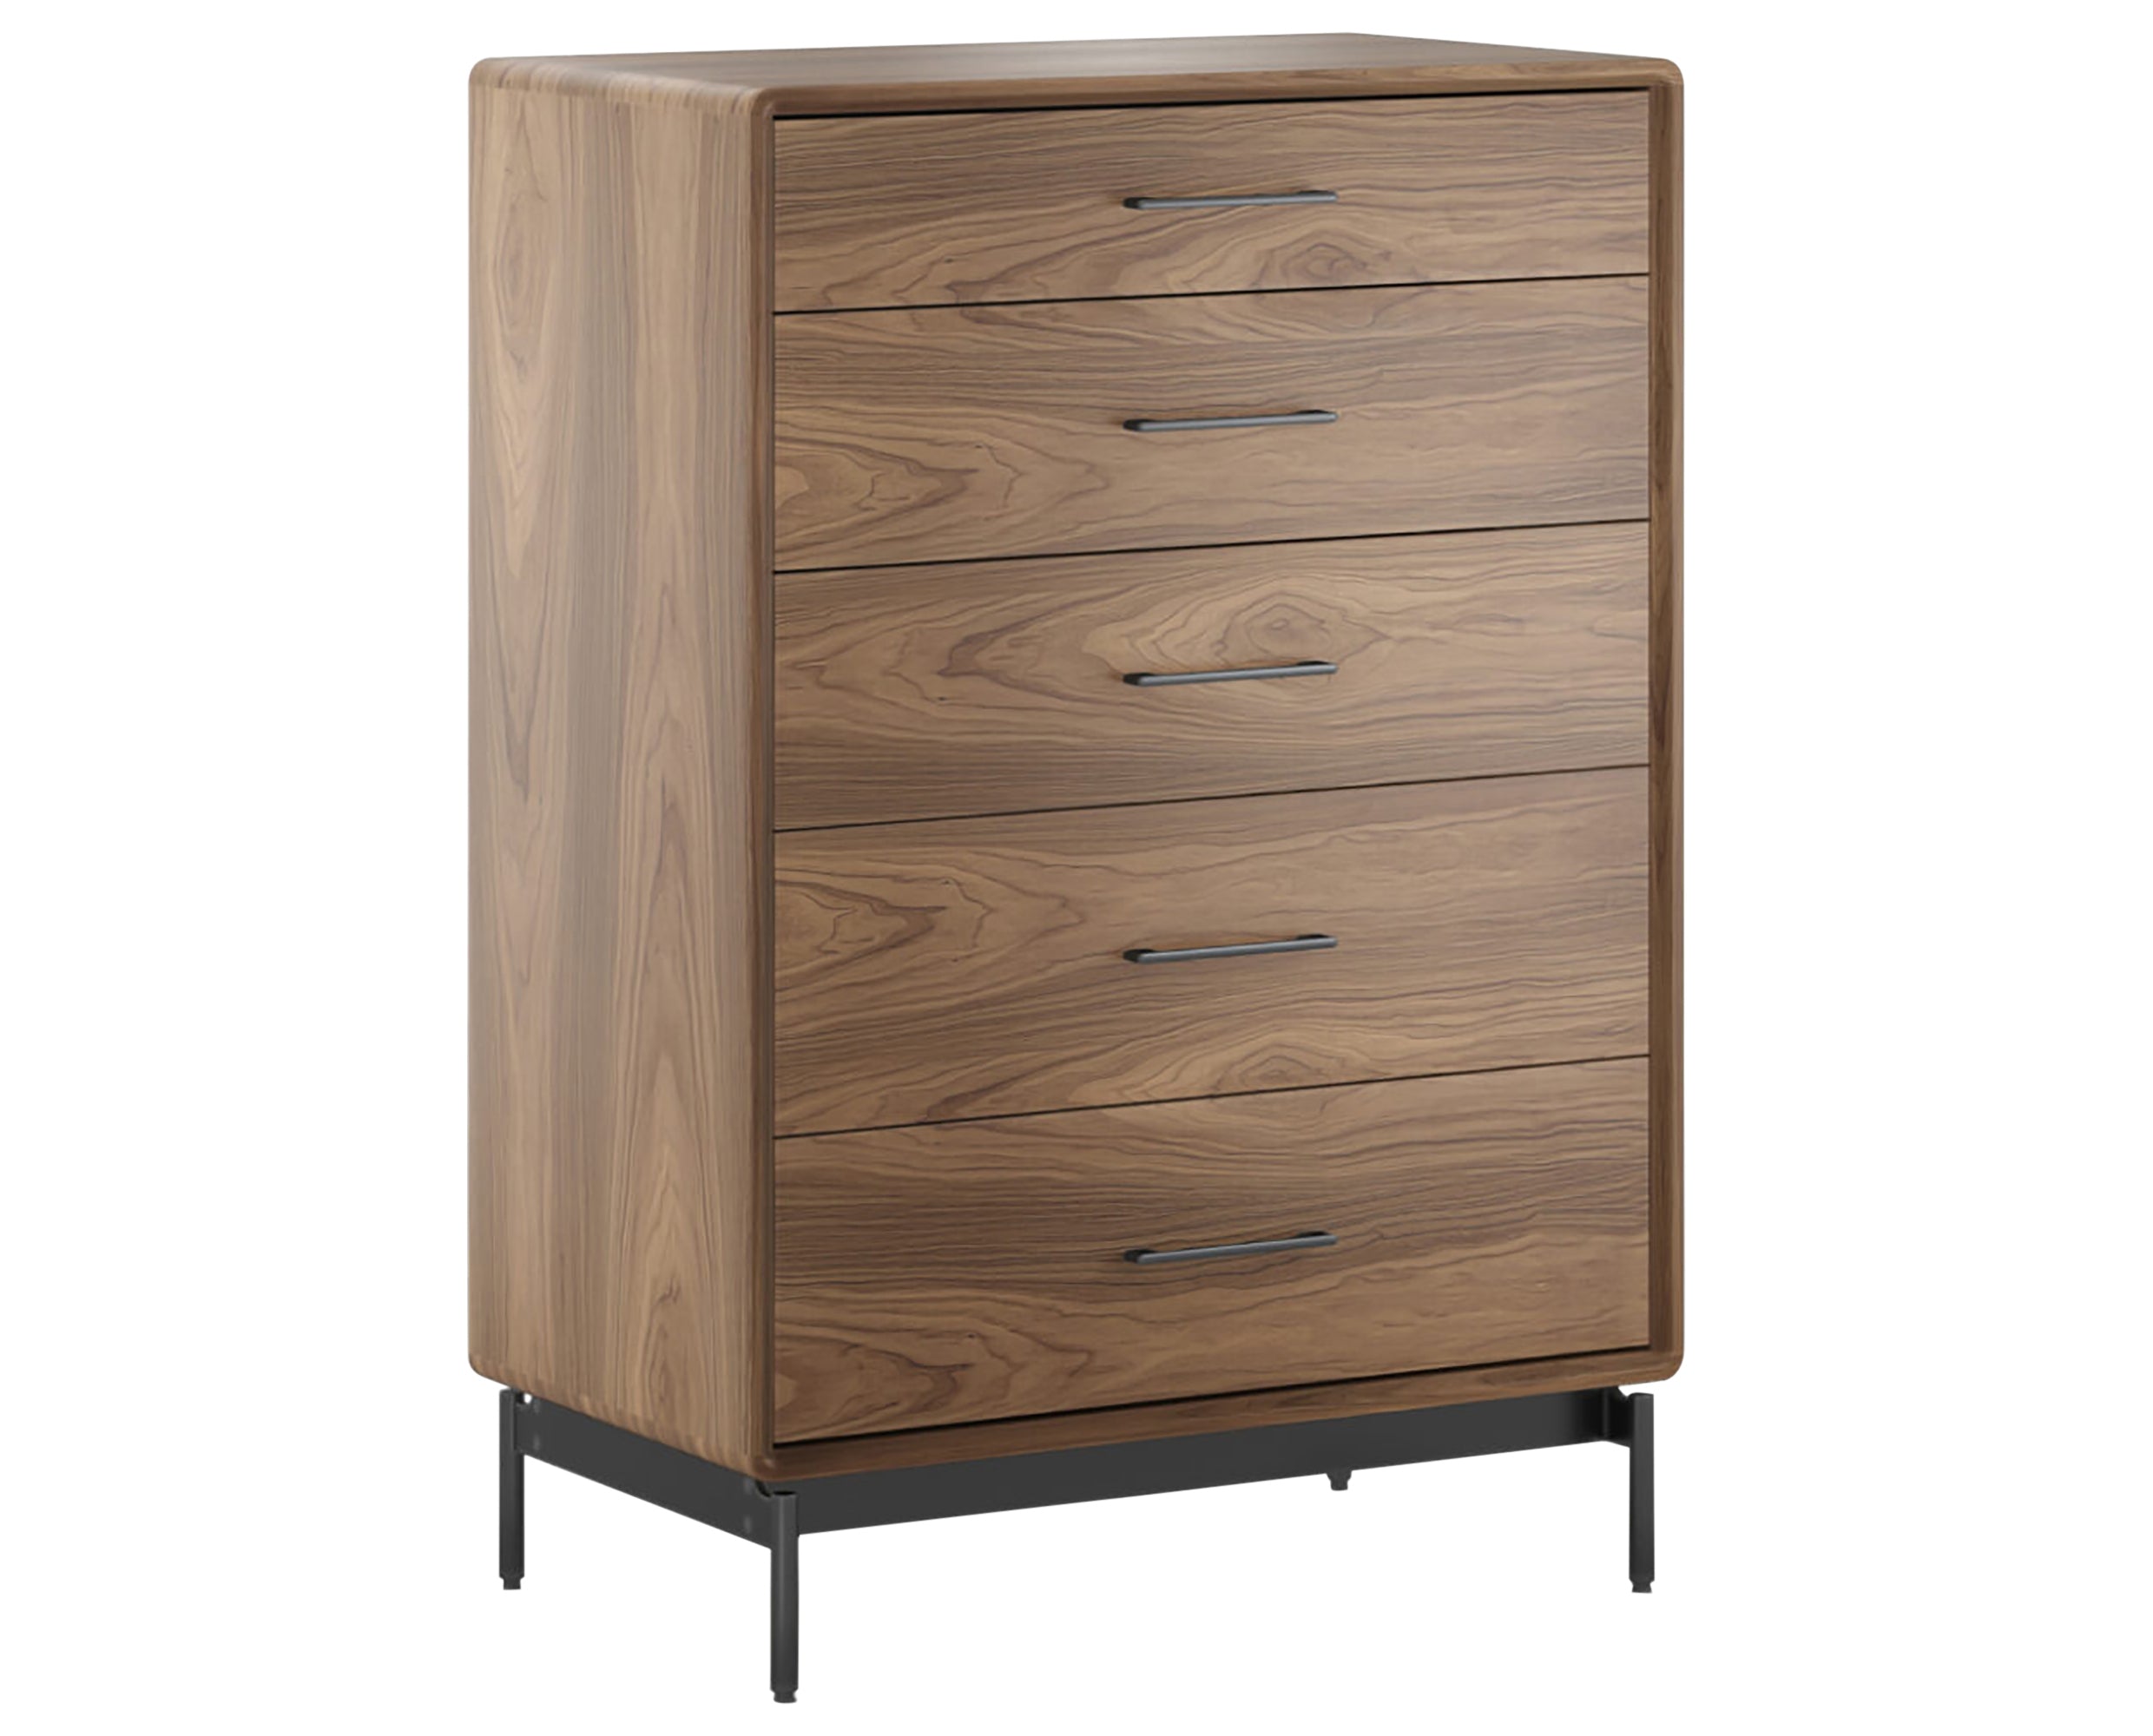 Natural Walnut with Powder Coated Steel | BDI Linq 5 Drawer Chest | Valley Ridge Furniture